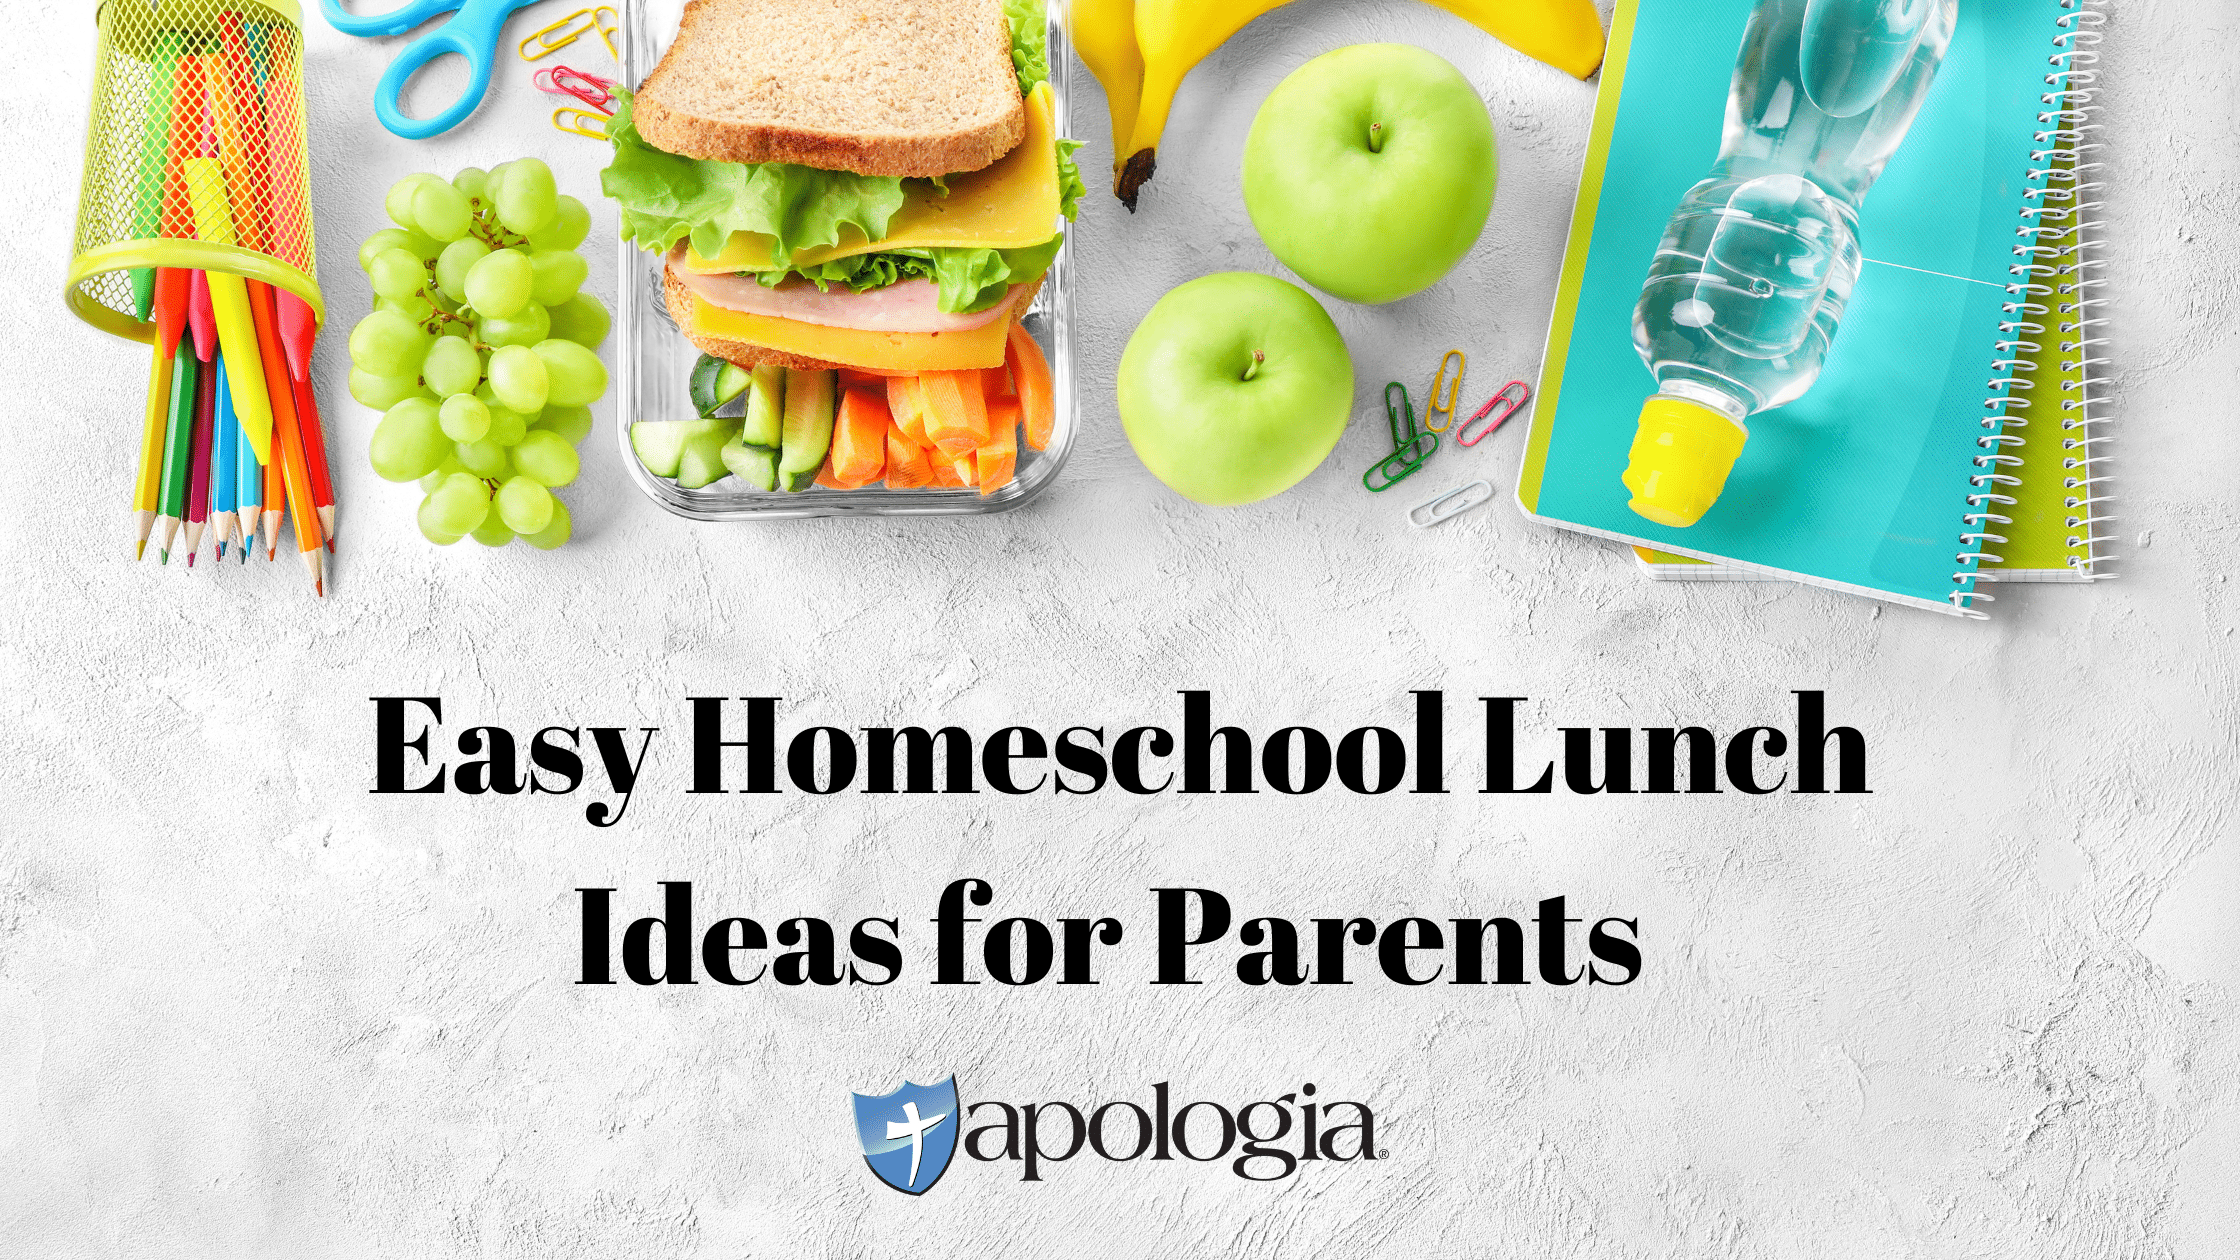 Easy Homeschool Lunch Ideas for Parents